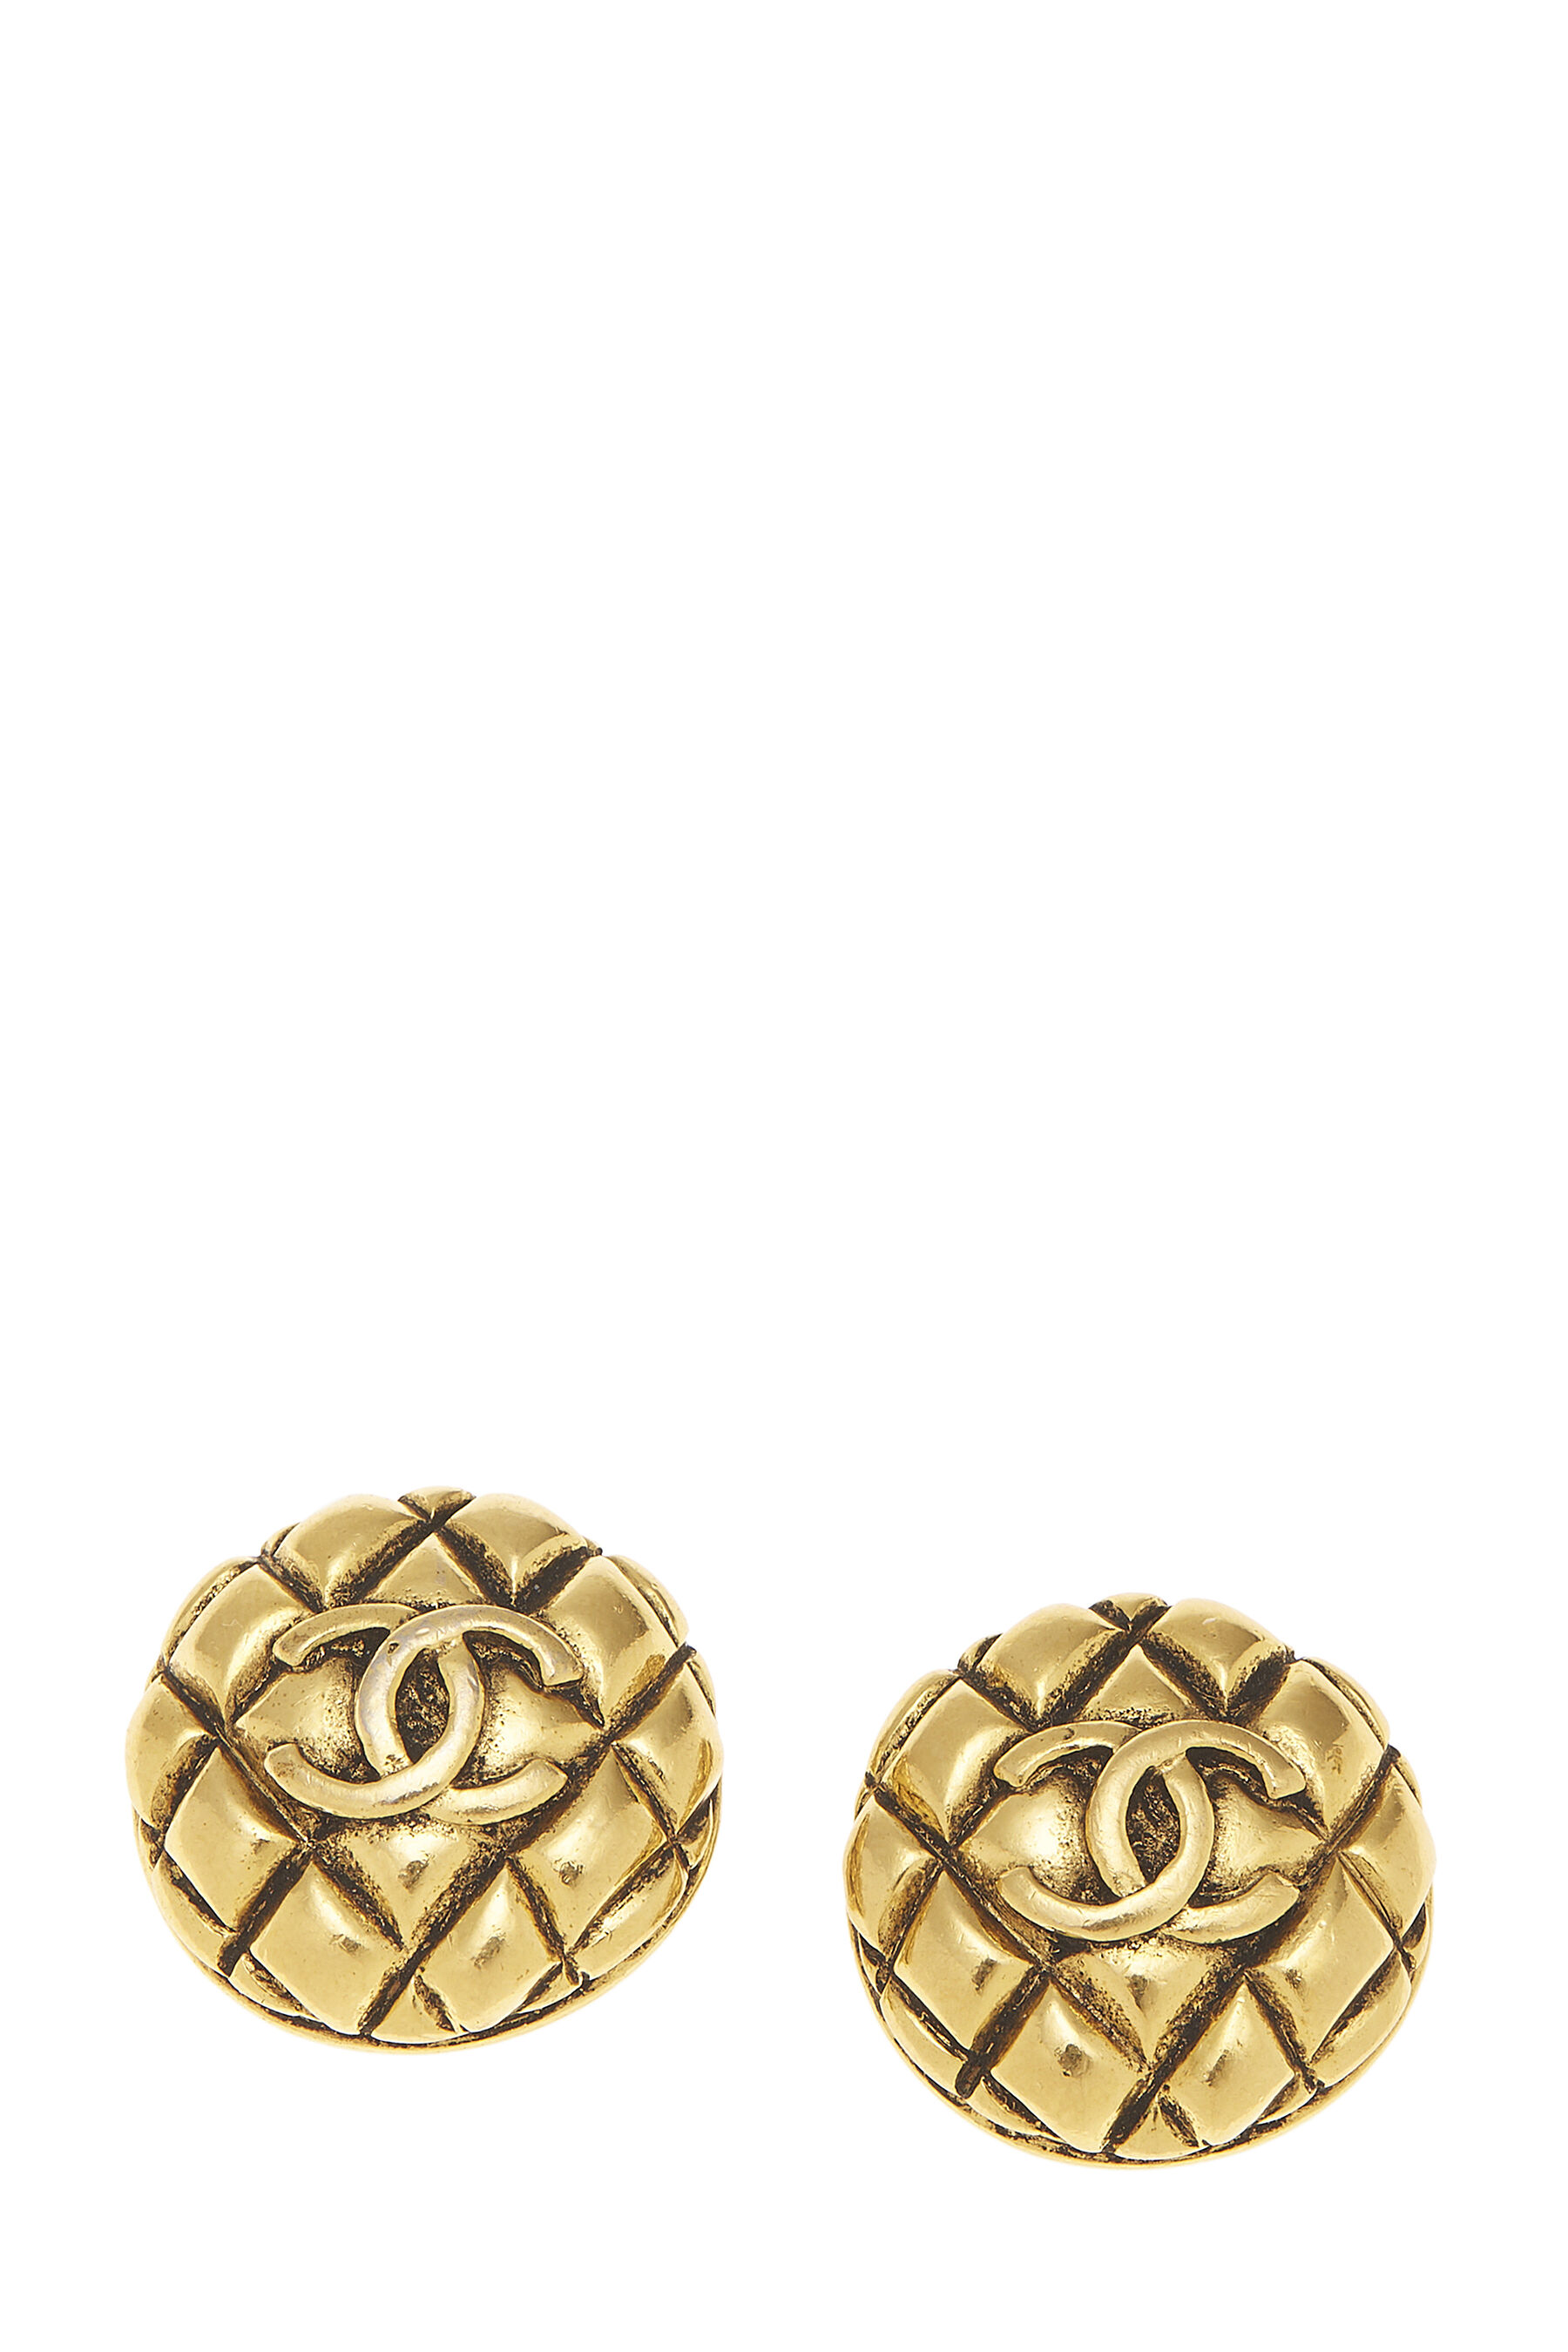 Chanel - Gold Quilted 'CC' Round Earrings